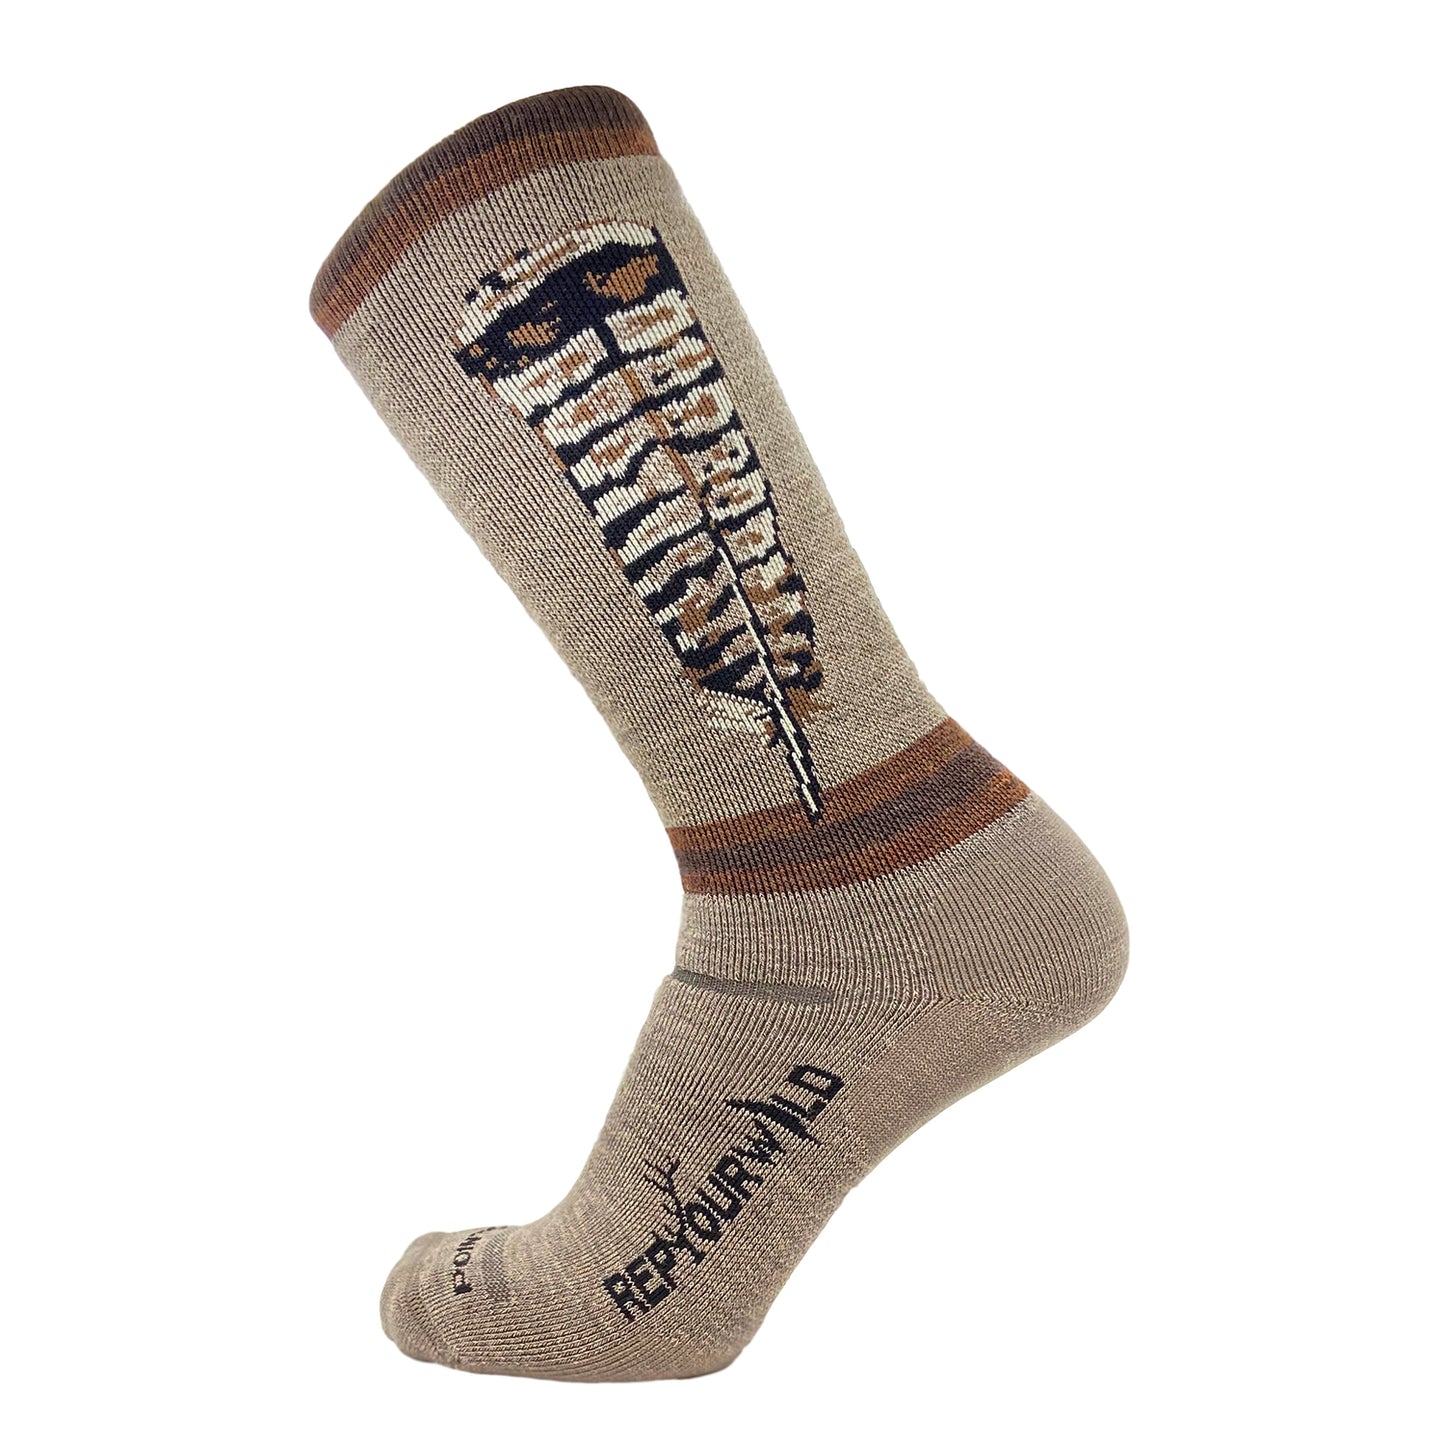 A single sock with a feather on the main part and reads repyourwild on the foot